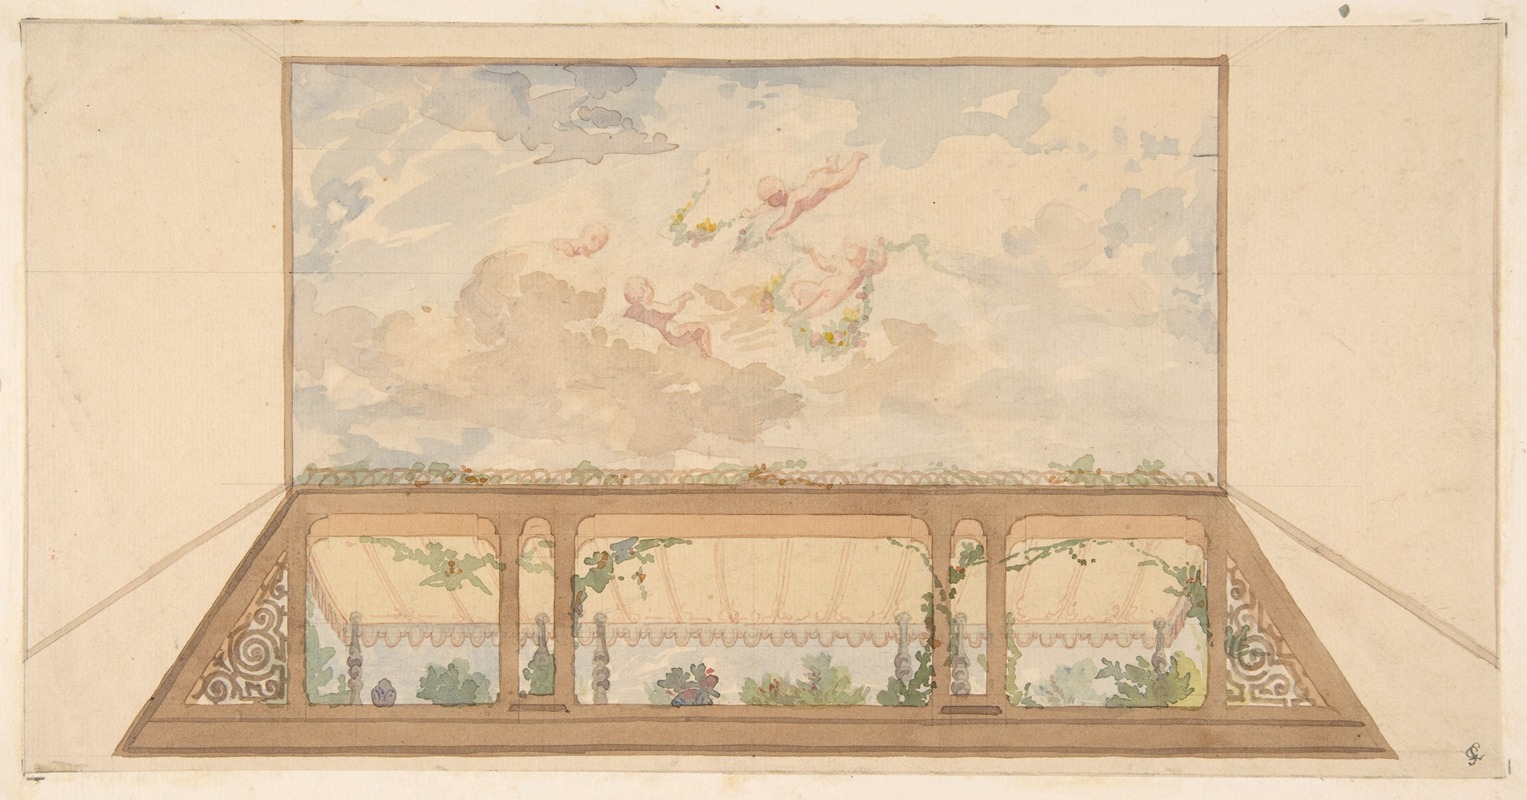 Jules-Edmond-Charles Lachaise - Design for a ceiling painted with a trompe l’oeil awning and putti in clouds